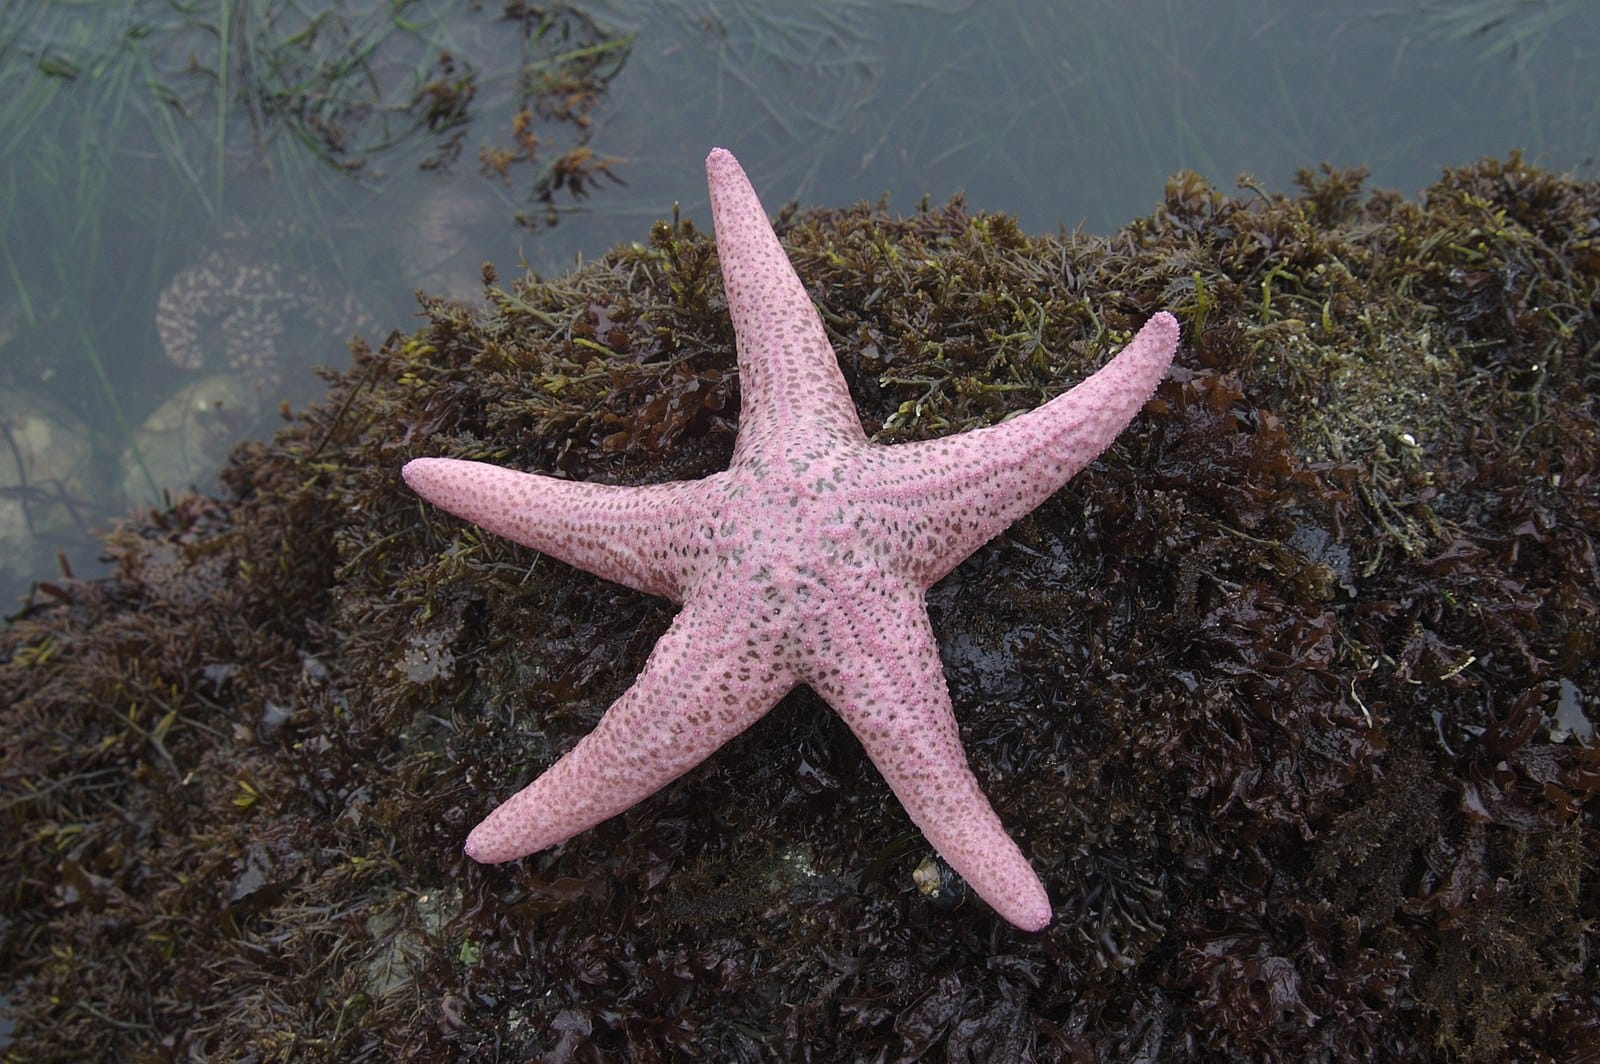  How Big Can Starfish Get